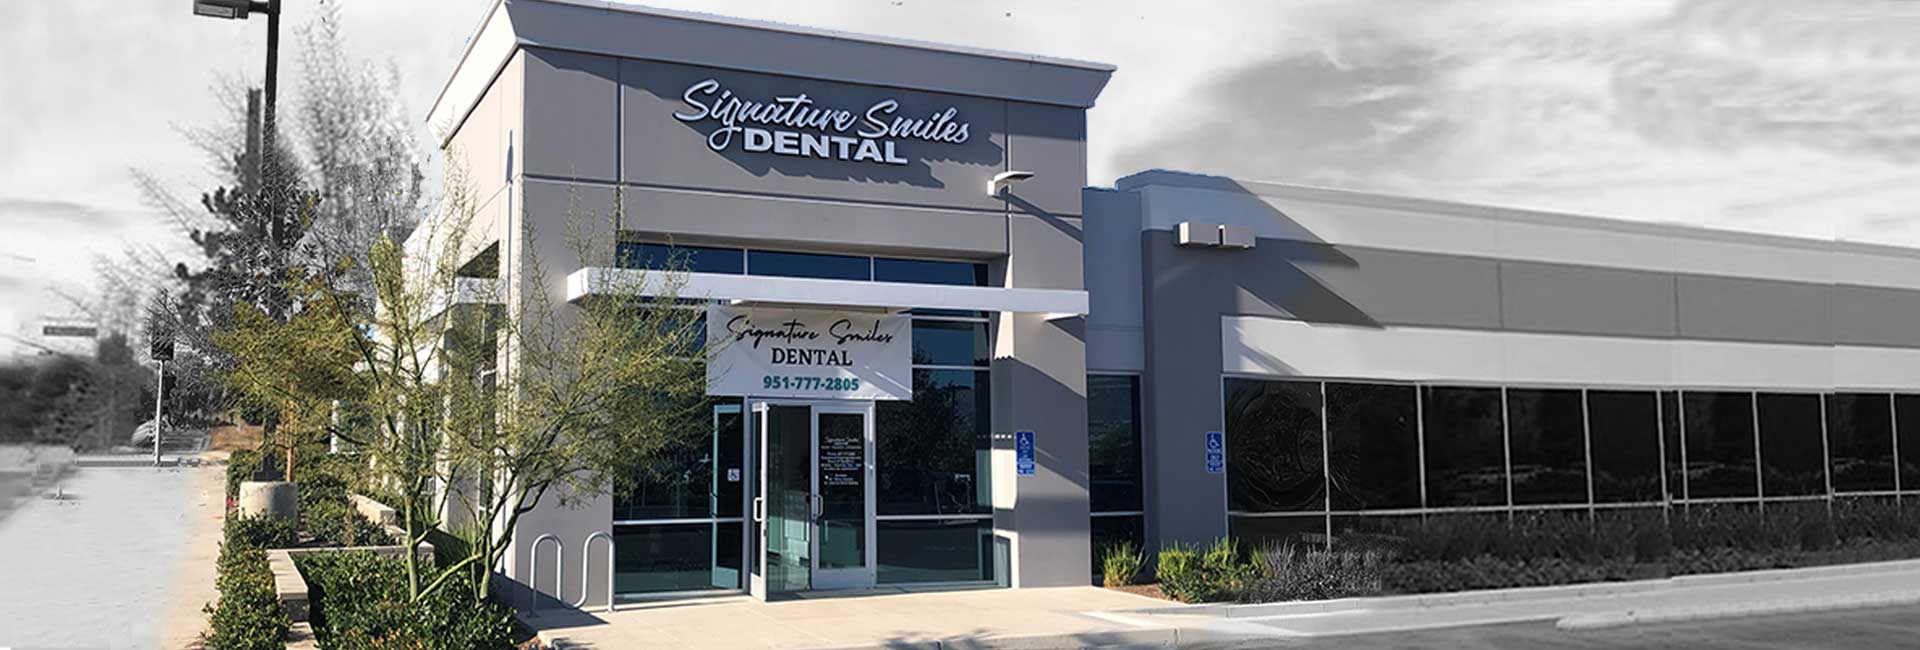 Our Office - Signature Smiles Dental